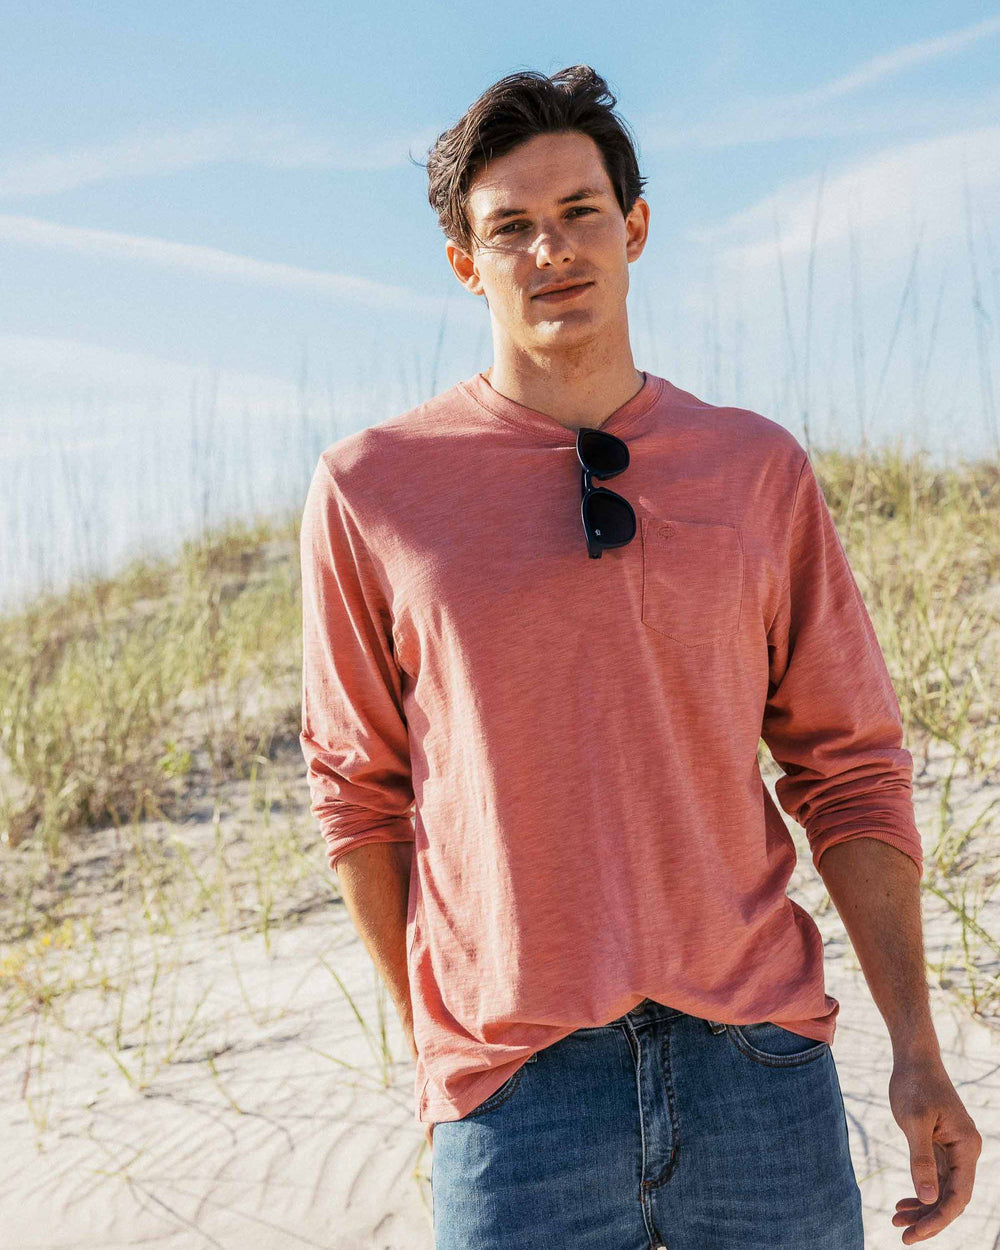 The lifestyle view of the Men's Sun Farer Long Sleeve T-Shirt by Southern Tide - Spanish Rose